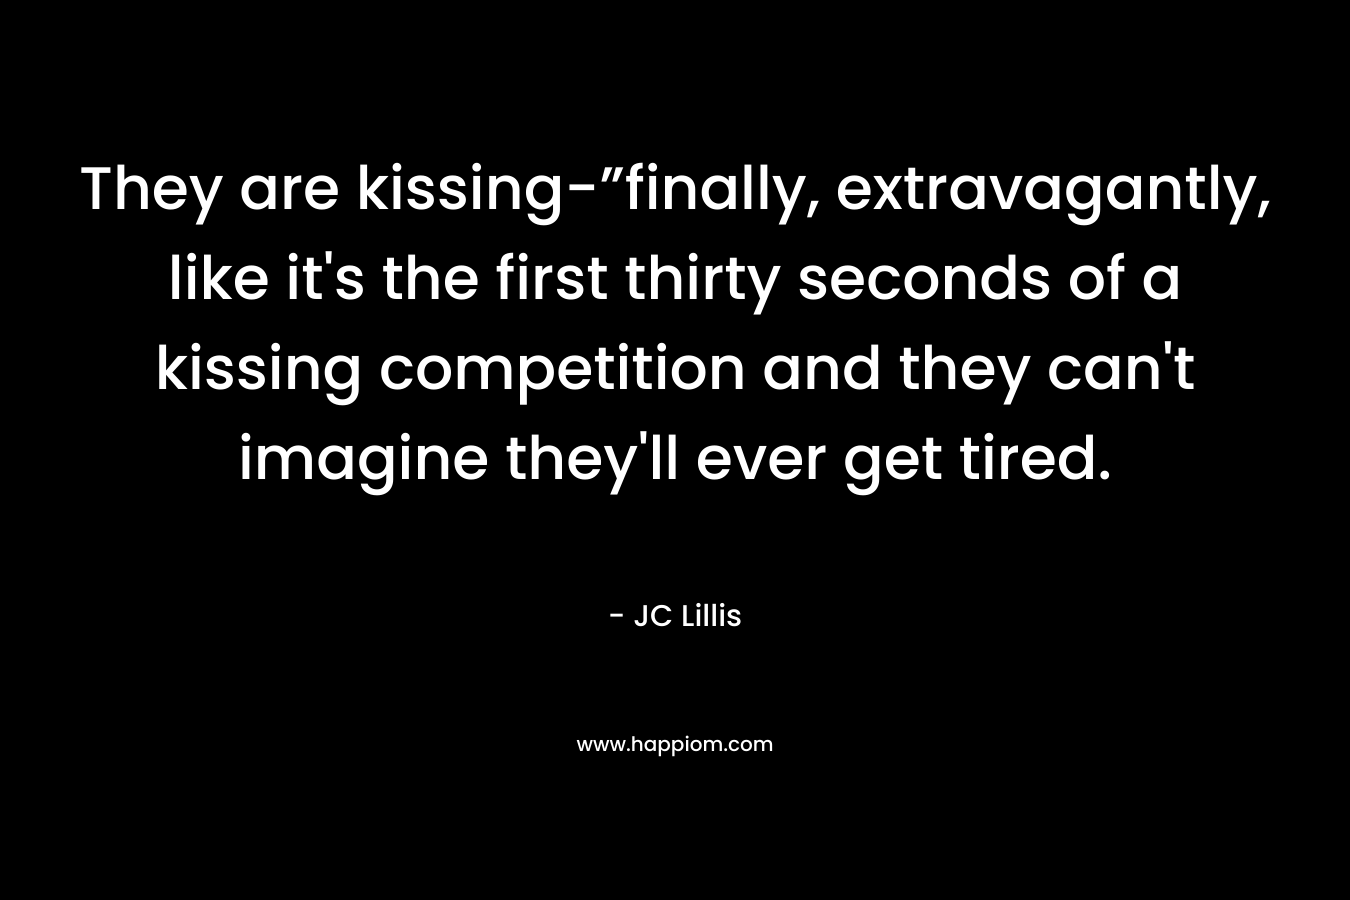 They are kissing-”finally, extravagantly, like it’s the first thirty seconds of a kissing competition and they can’t imagine they’ll ever get tired. – JC Lillis